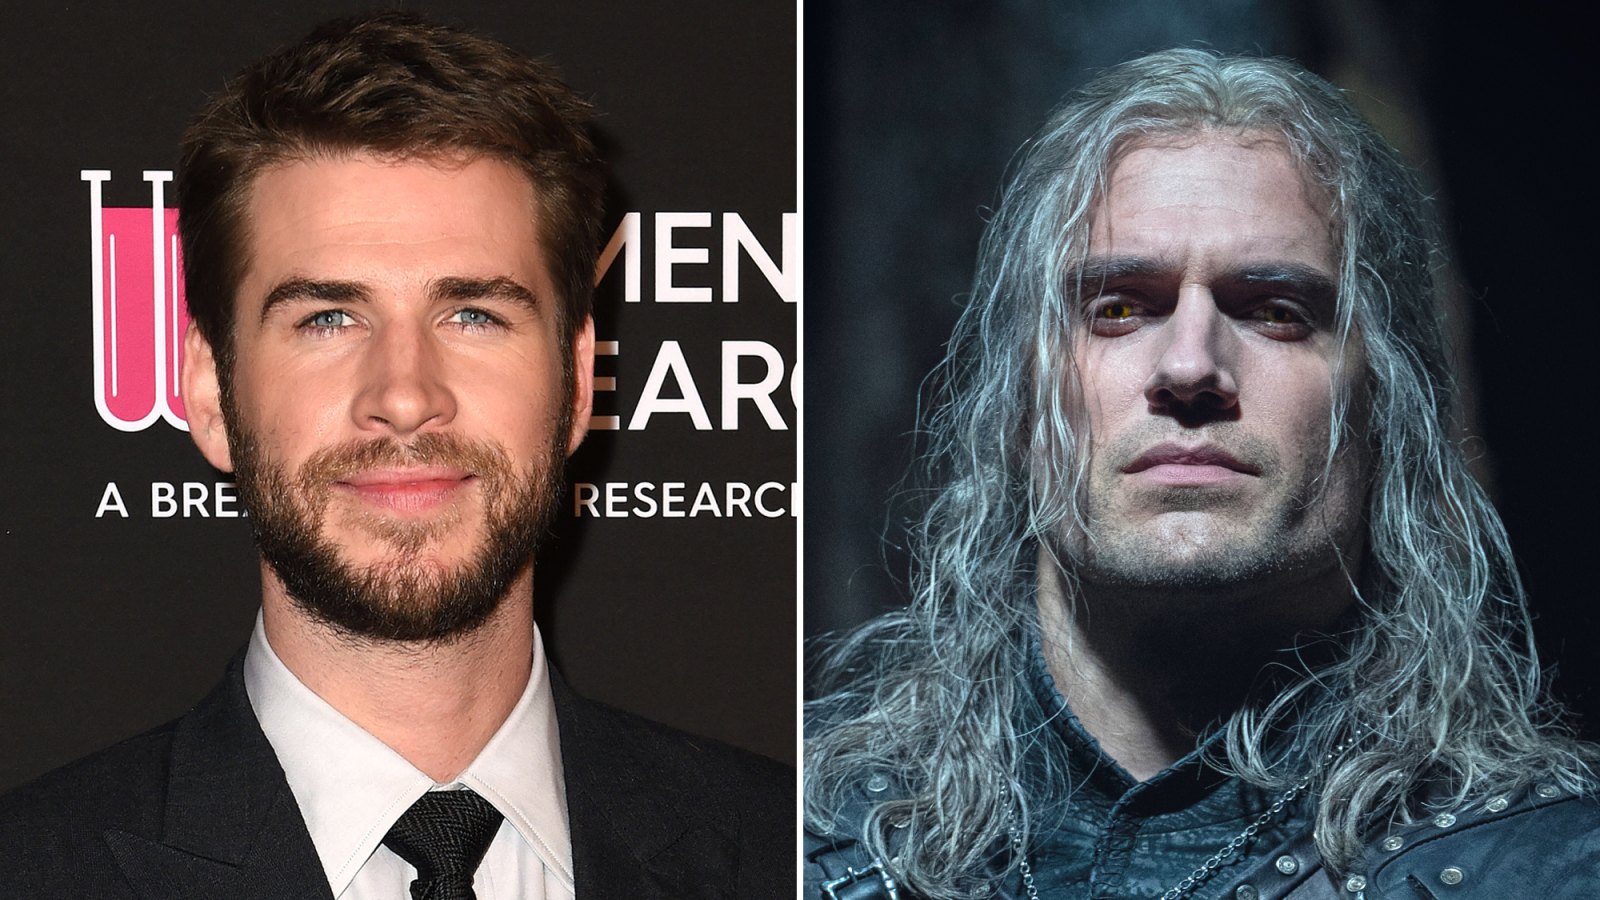 'The Witcher' Recasts Geralt, Replaces Henry Cavill With Liam Hemsworth Amid Original Star's Return as Superman